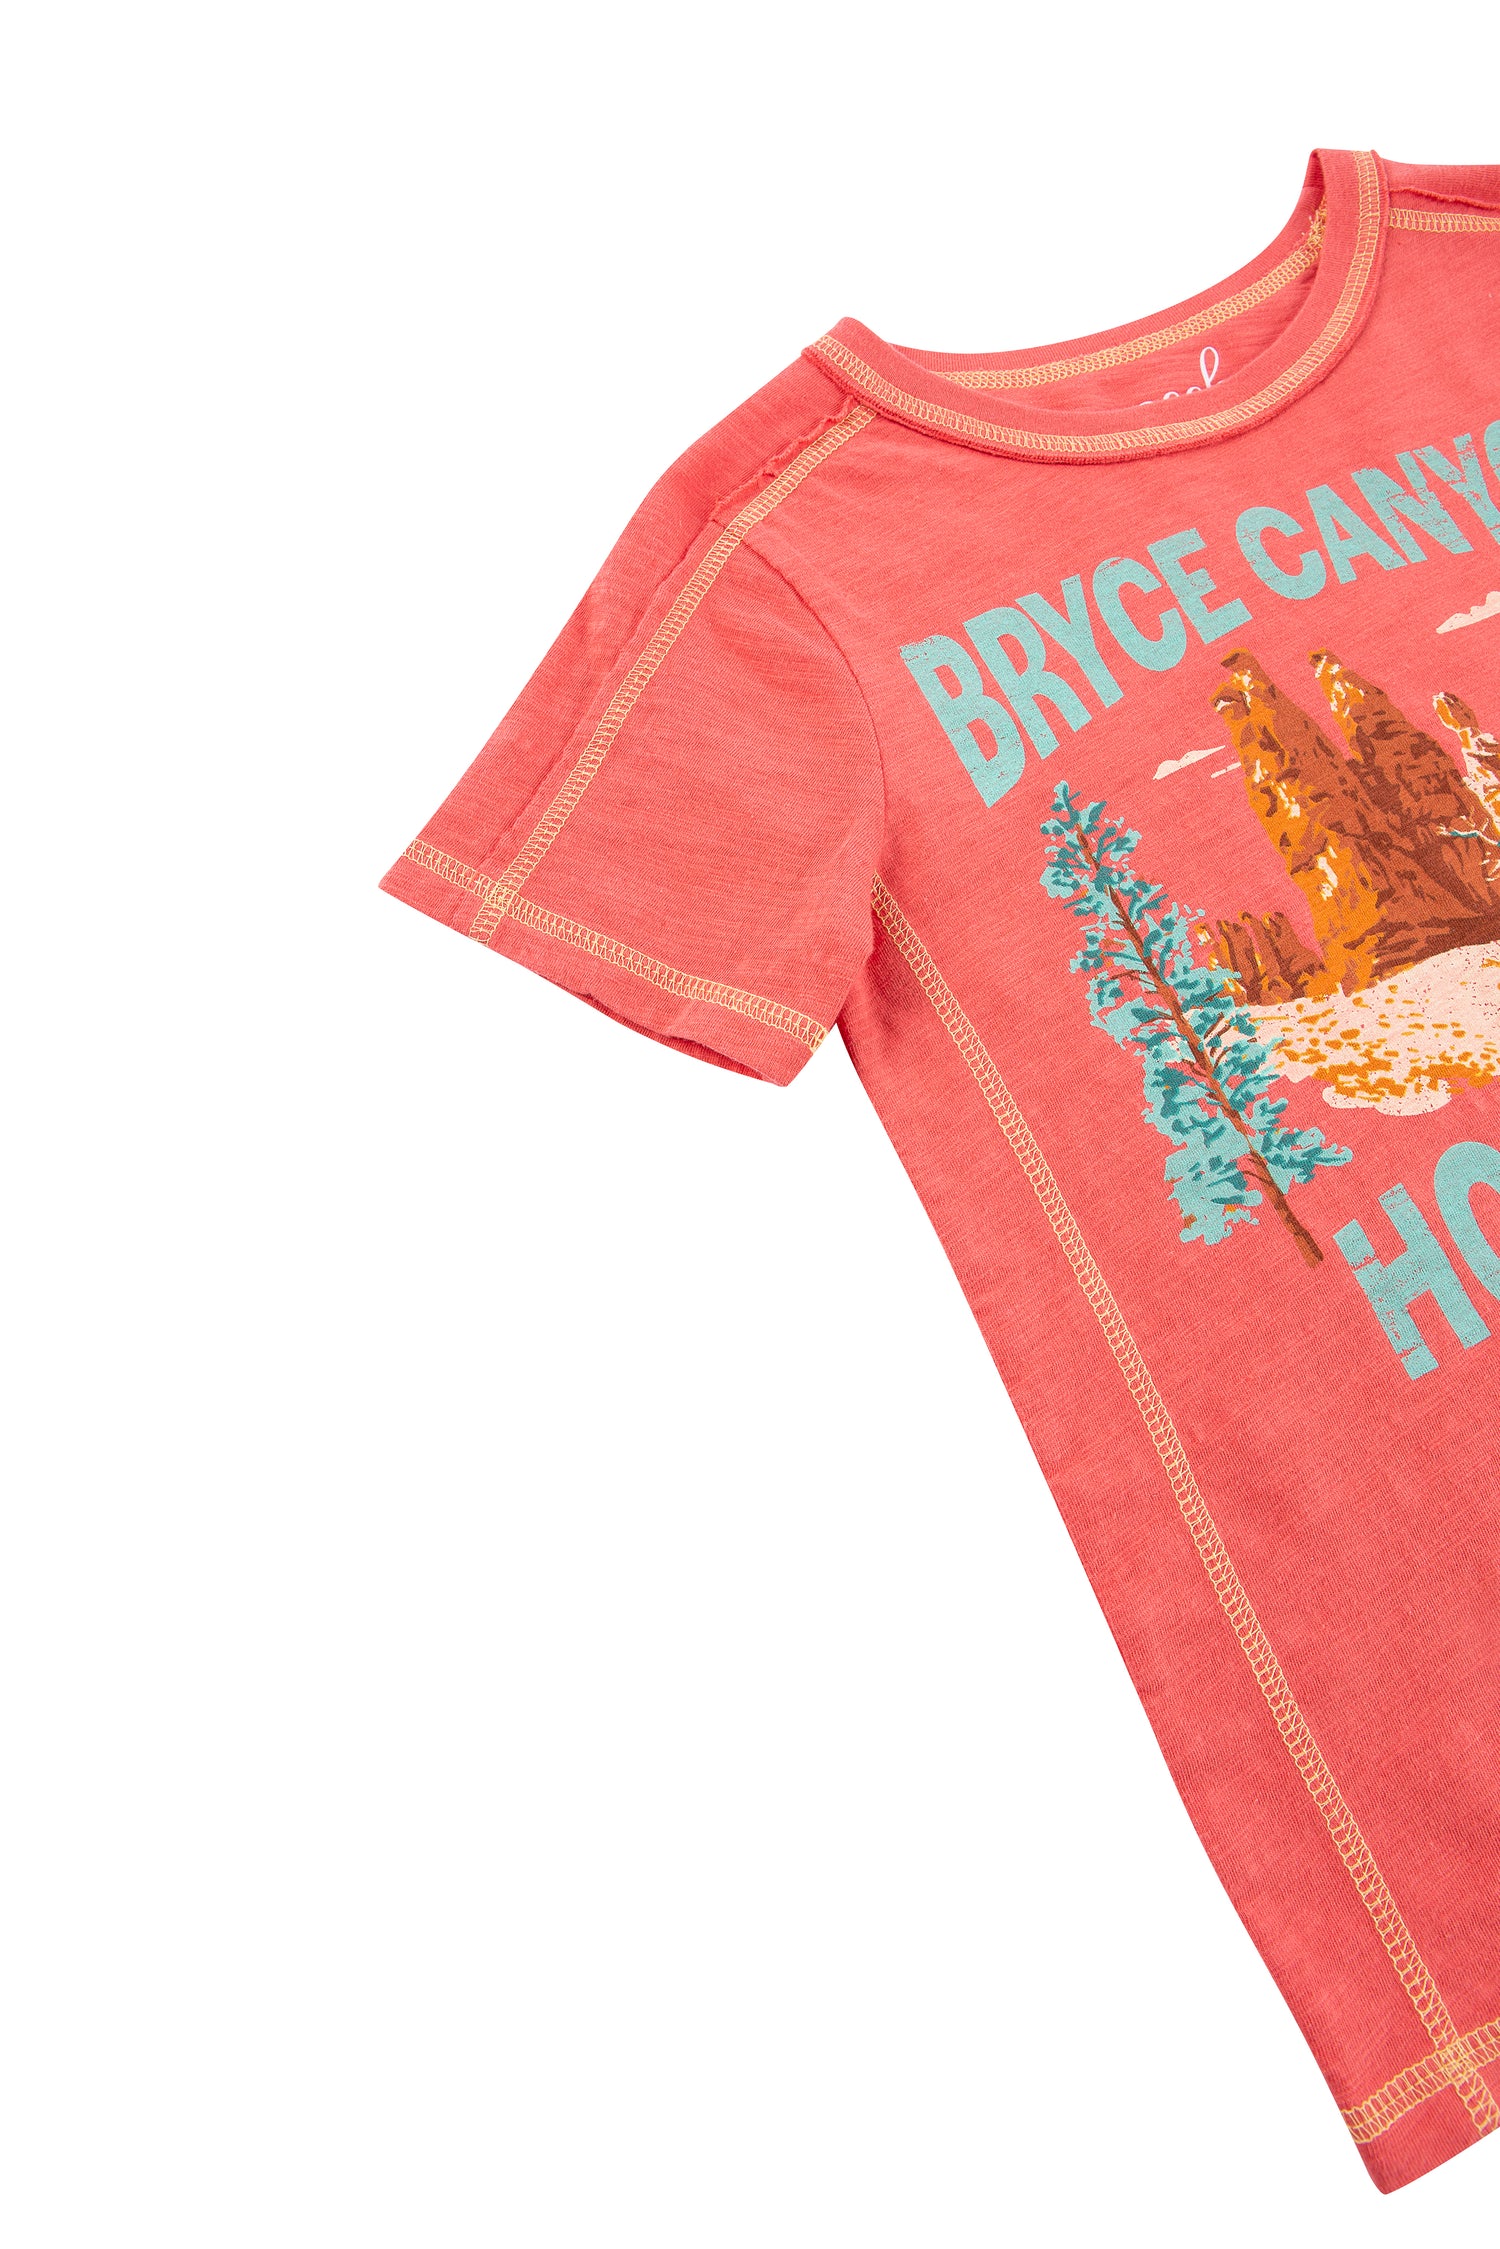 CLOSE UP OF RED T-SHIRT WITH MOUNTAIN GRAPHICS AND "BRYCE CANYON HOODOOS TALL ROCK FORMATIONS PROTRUDING FROM THE GROUND"